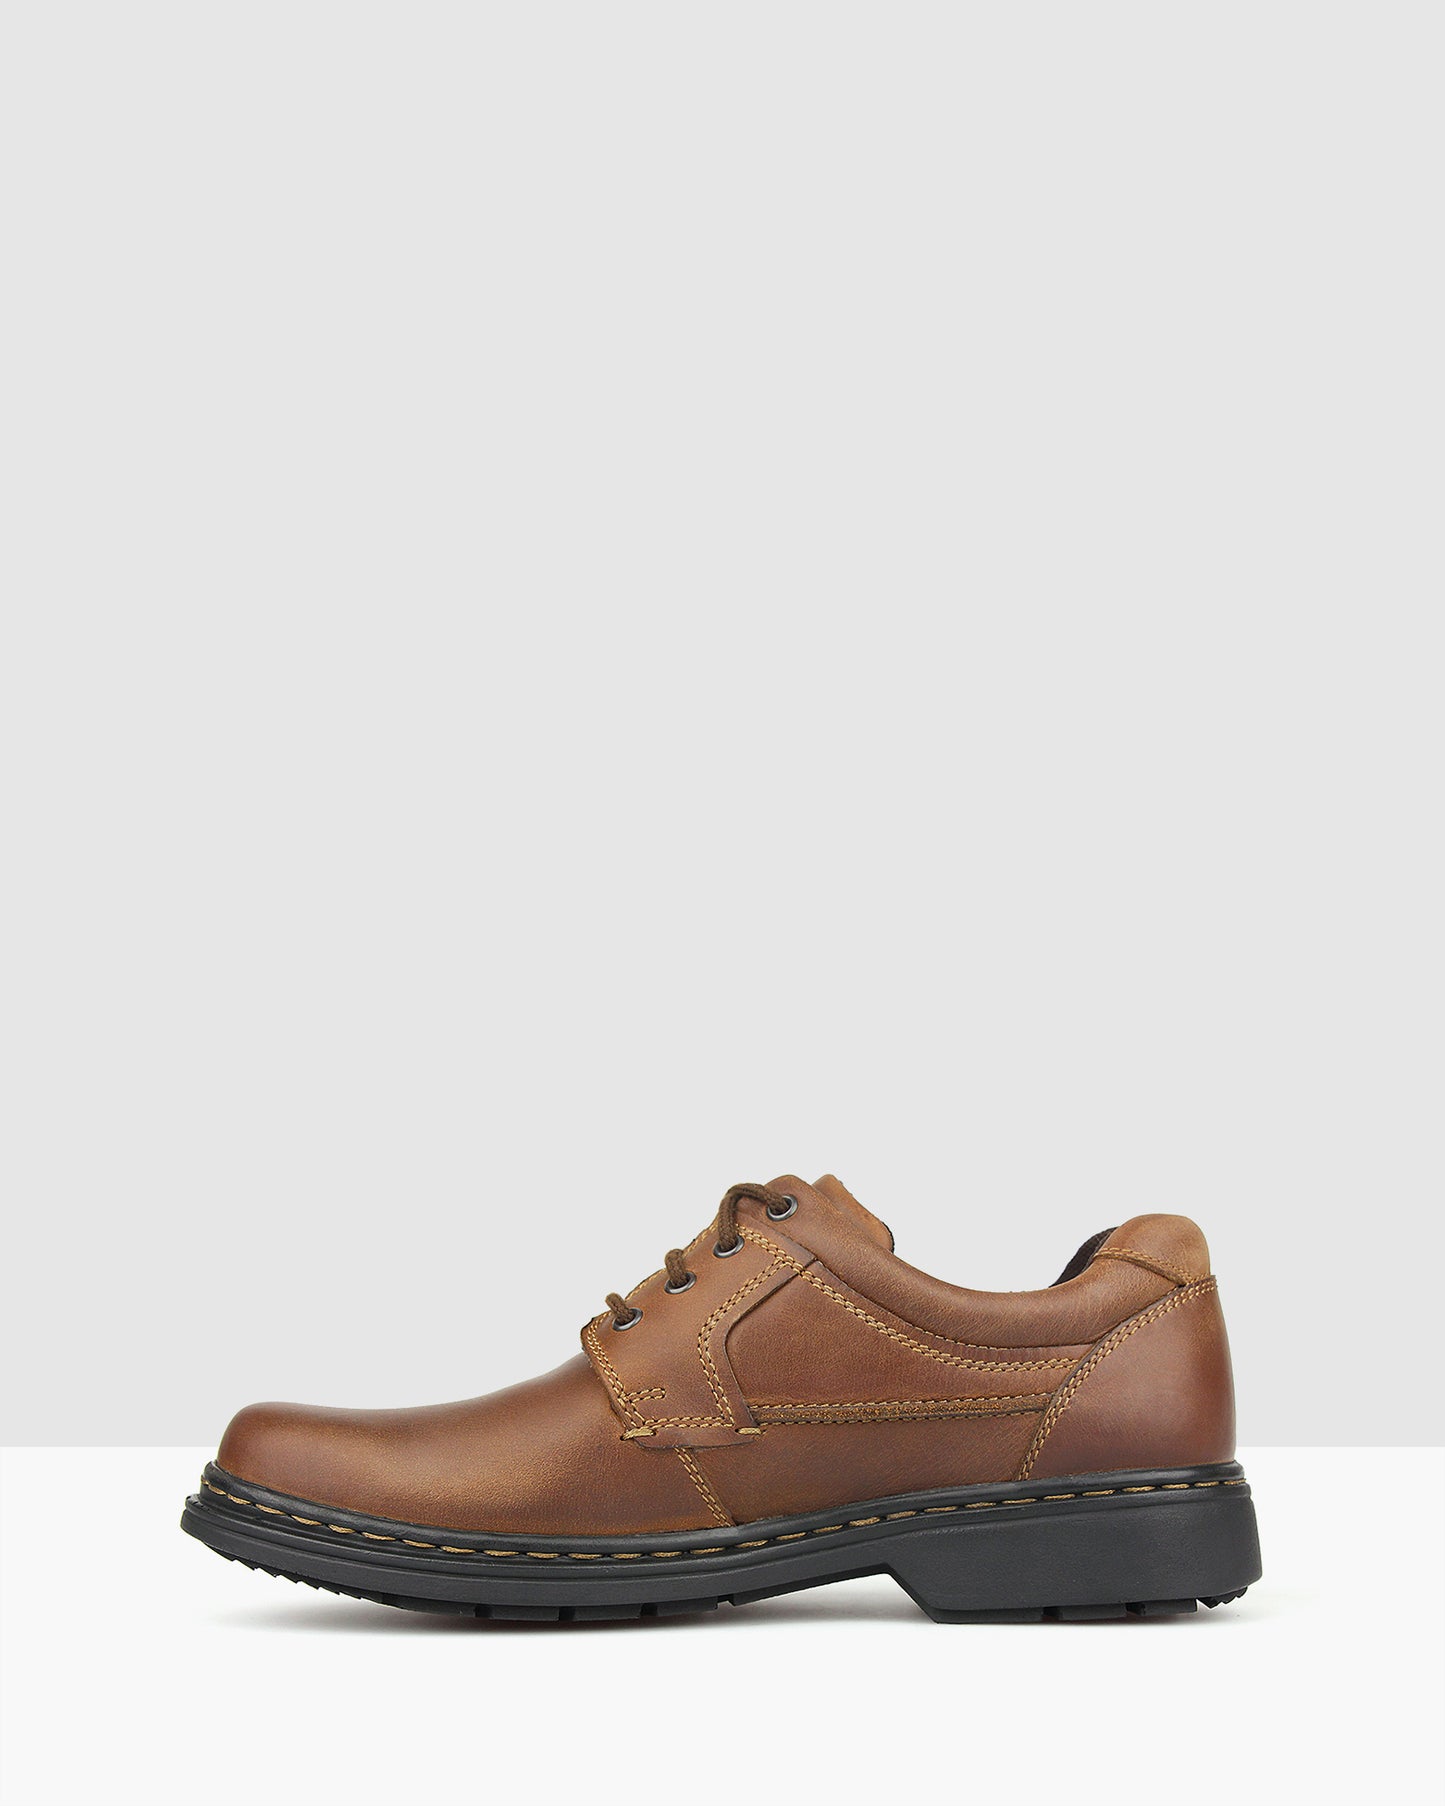 LARRY Leather Comfort Shoes